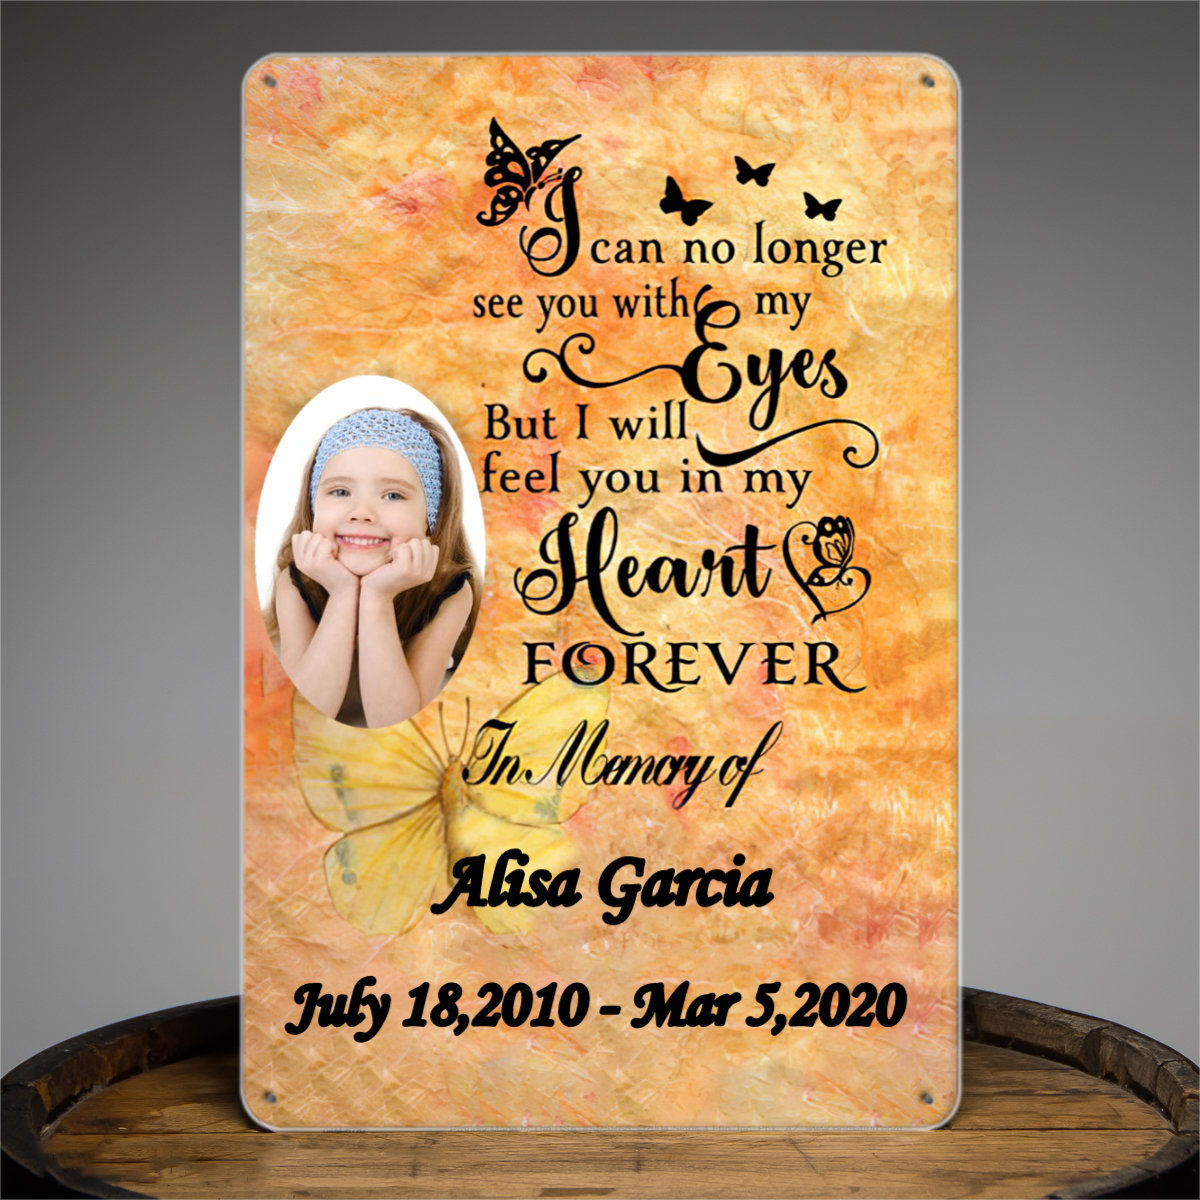 Personalized Tin Signs, Memorial Tin Signs, Photo Tin Signs, In Memory Tin Signs, Cemetery Decoration